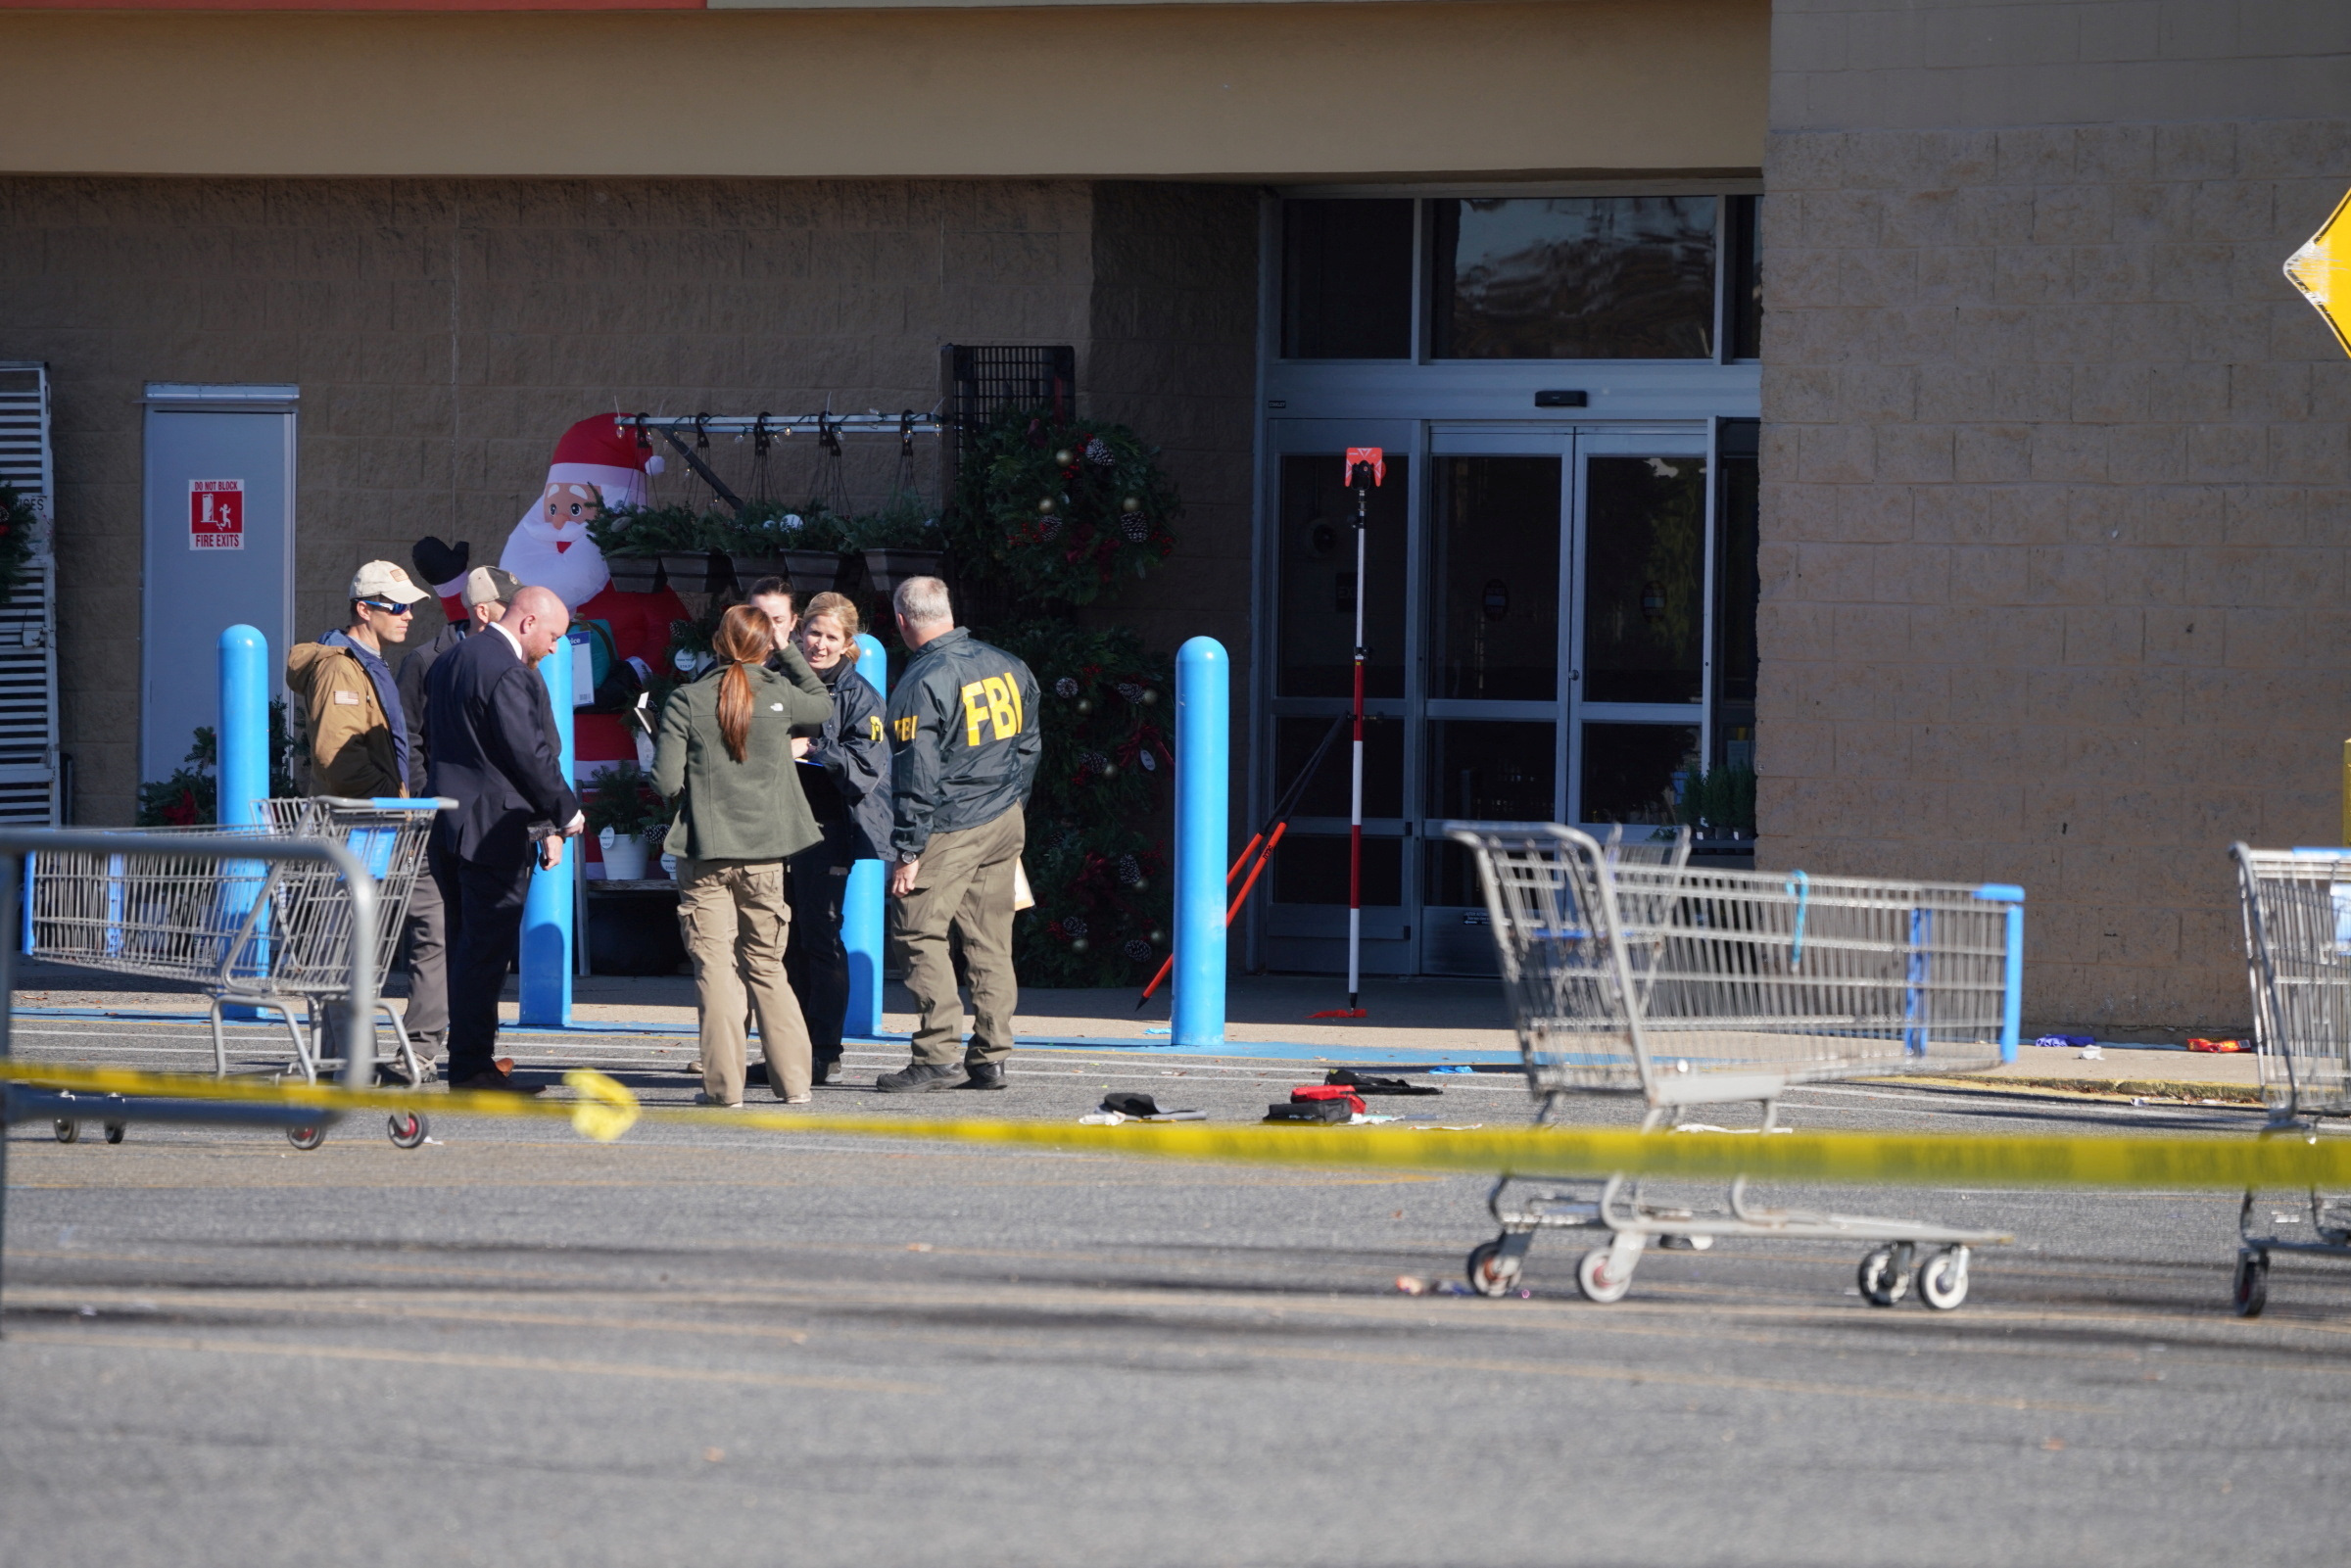 After the mass shooting at a Walmart in Chesapeake